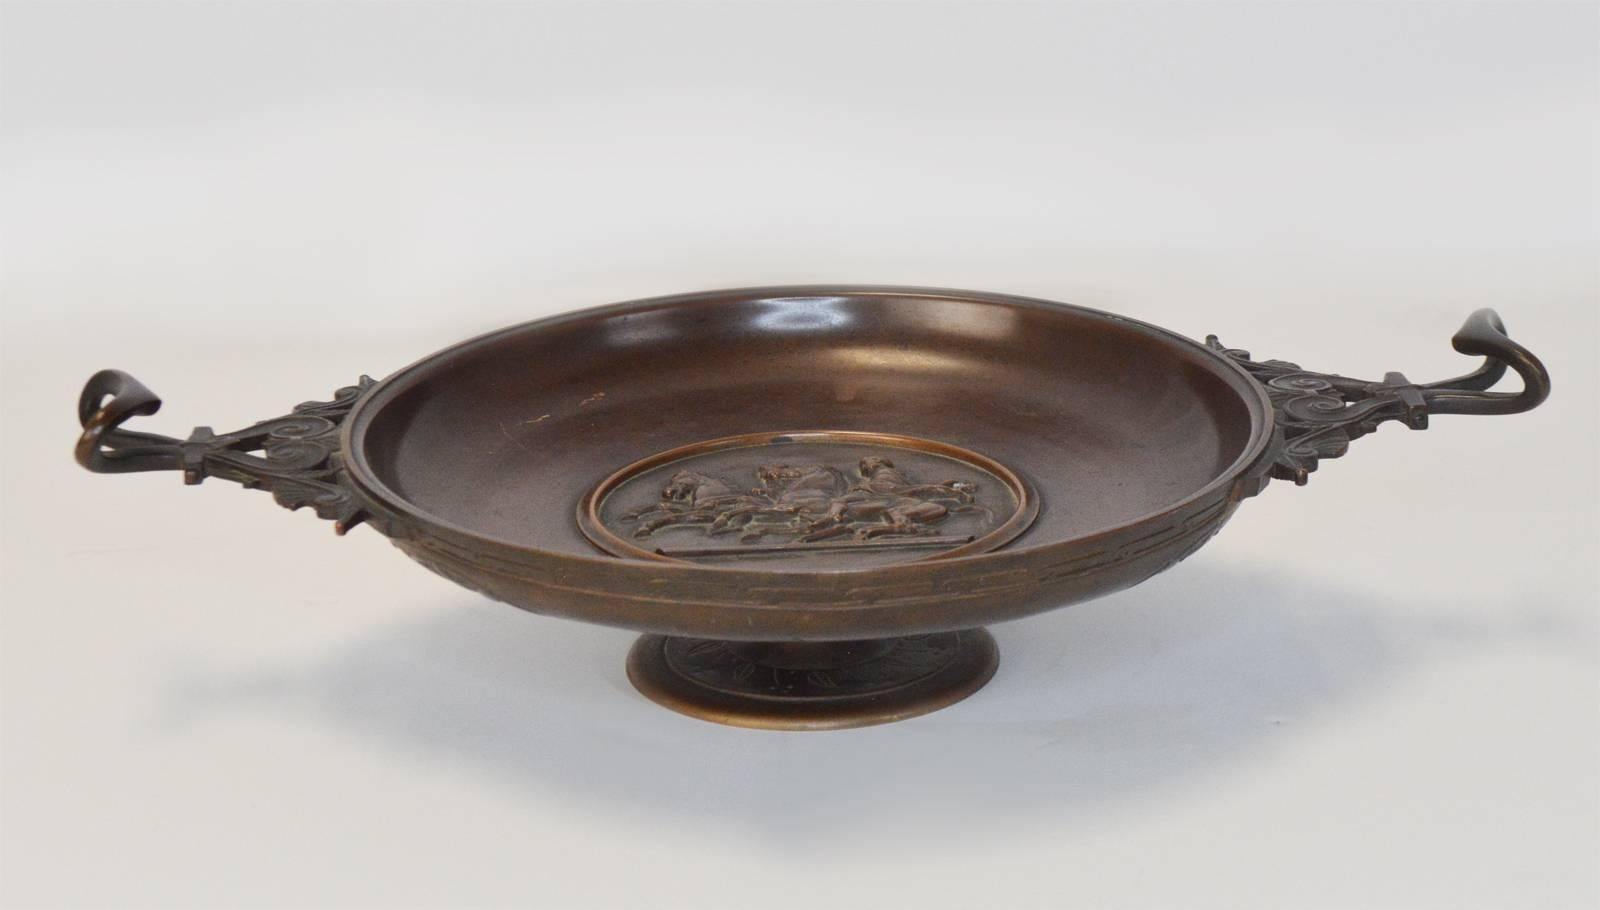 A good 19th century Italian bronze neo-greque footed Tazza with scrolled handles and arge, round centrepiece, in the centre with a round relief medallion with an antique classical scene. The two handles with cast Bacchus heads. Ferdinand Levillain